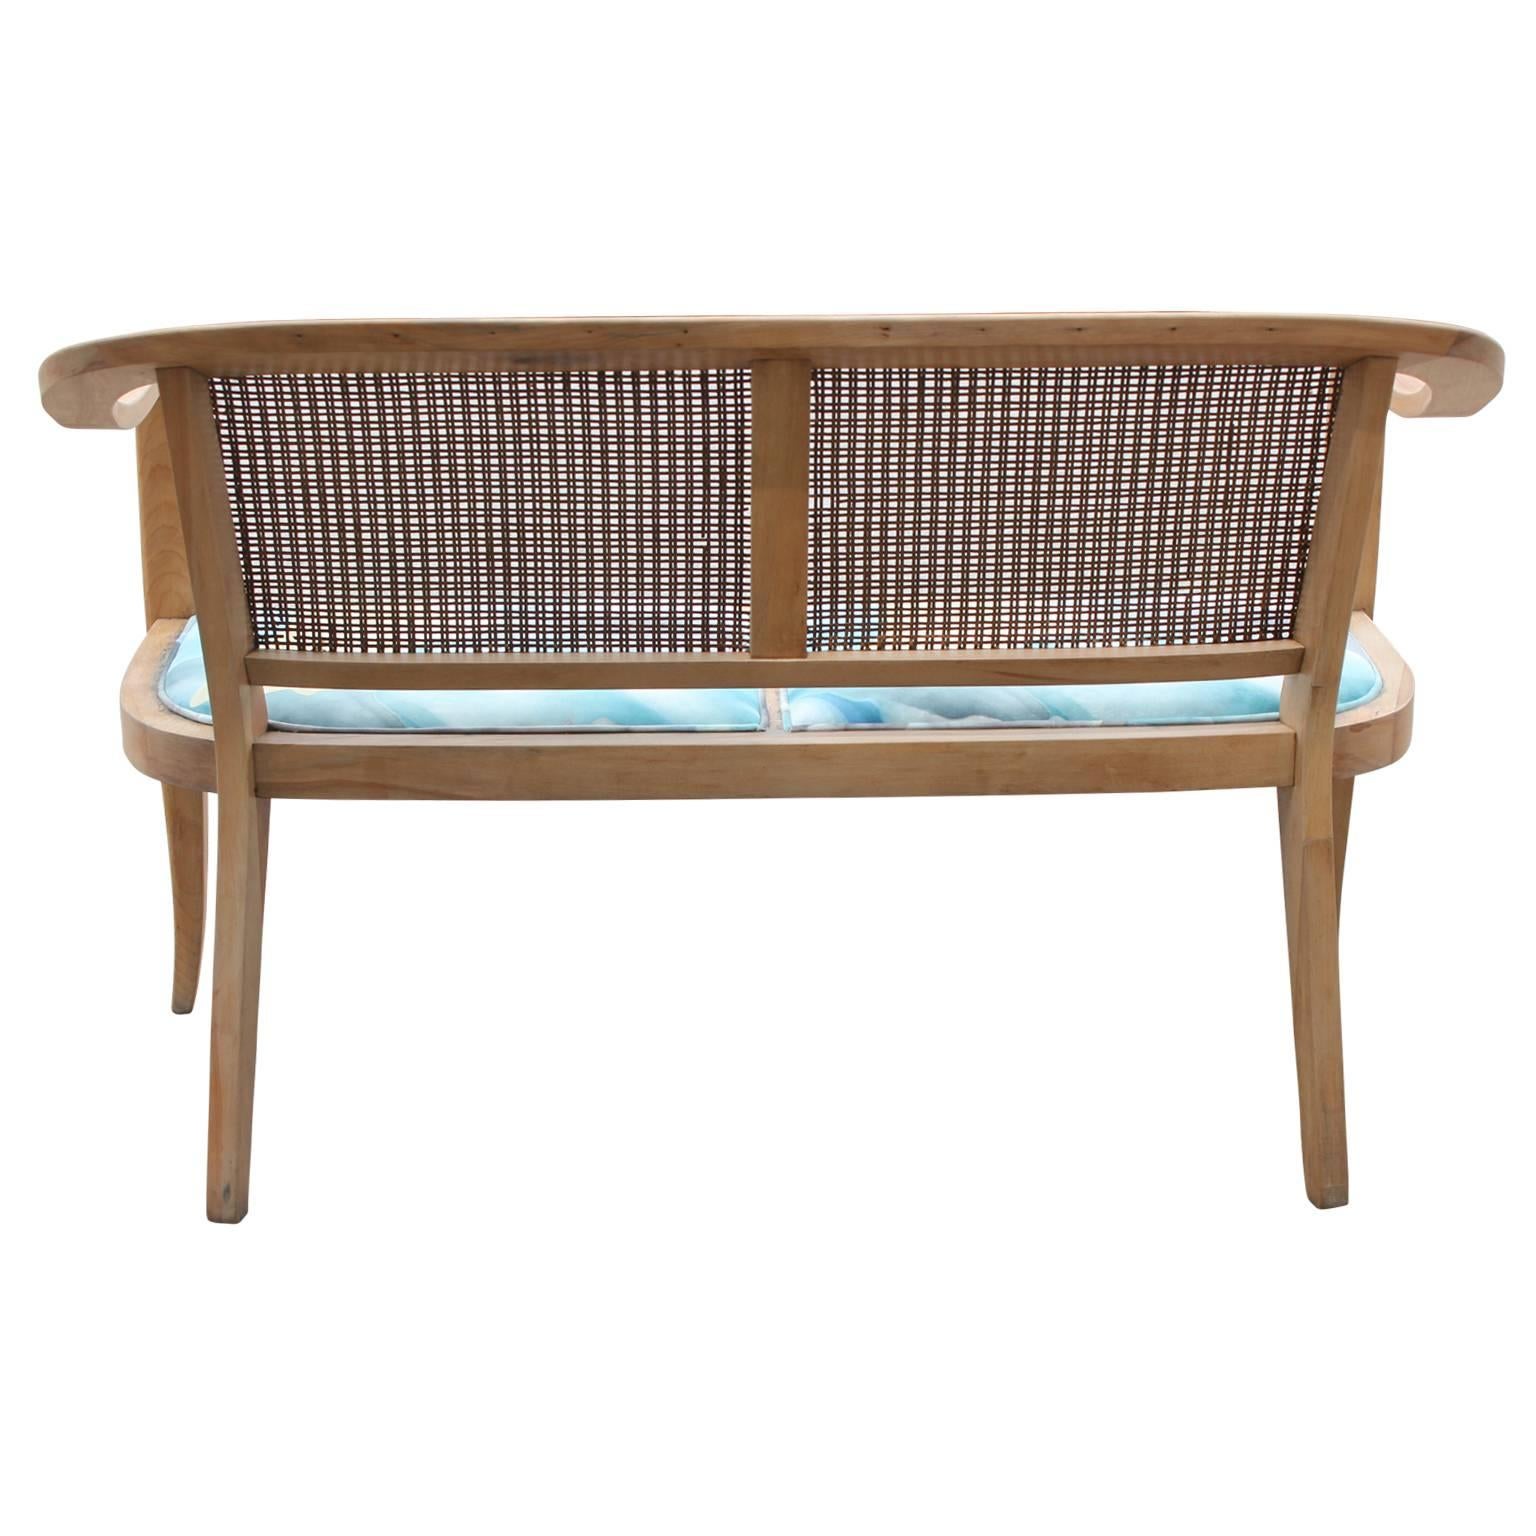 Fabric Edward Wormley Style Bench with Bleached Wood and Cane Back